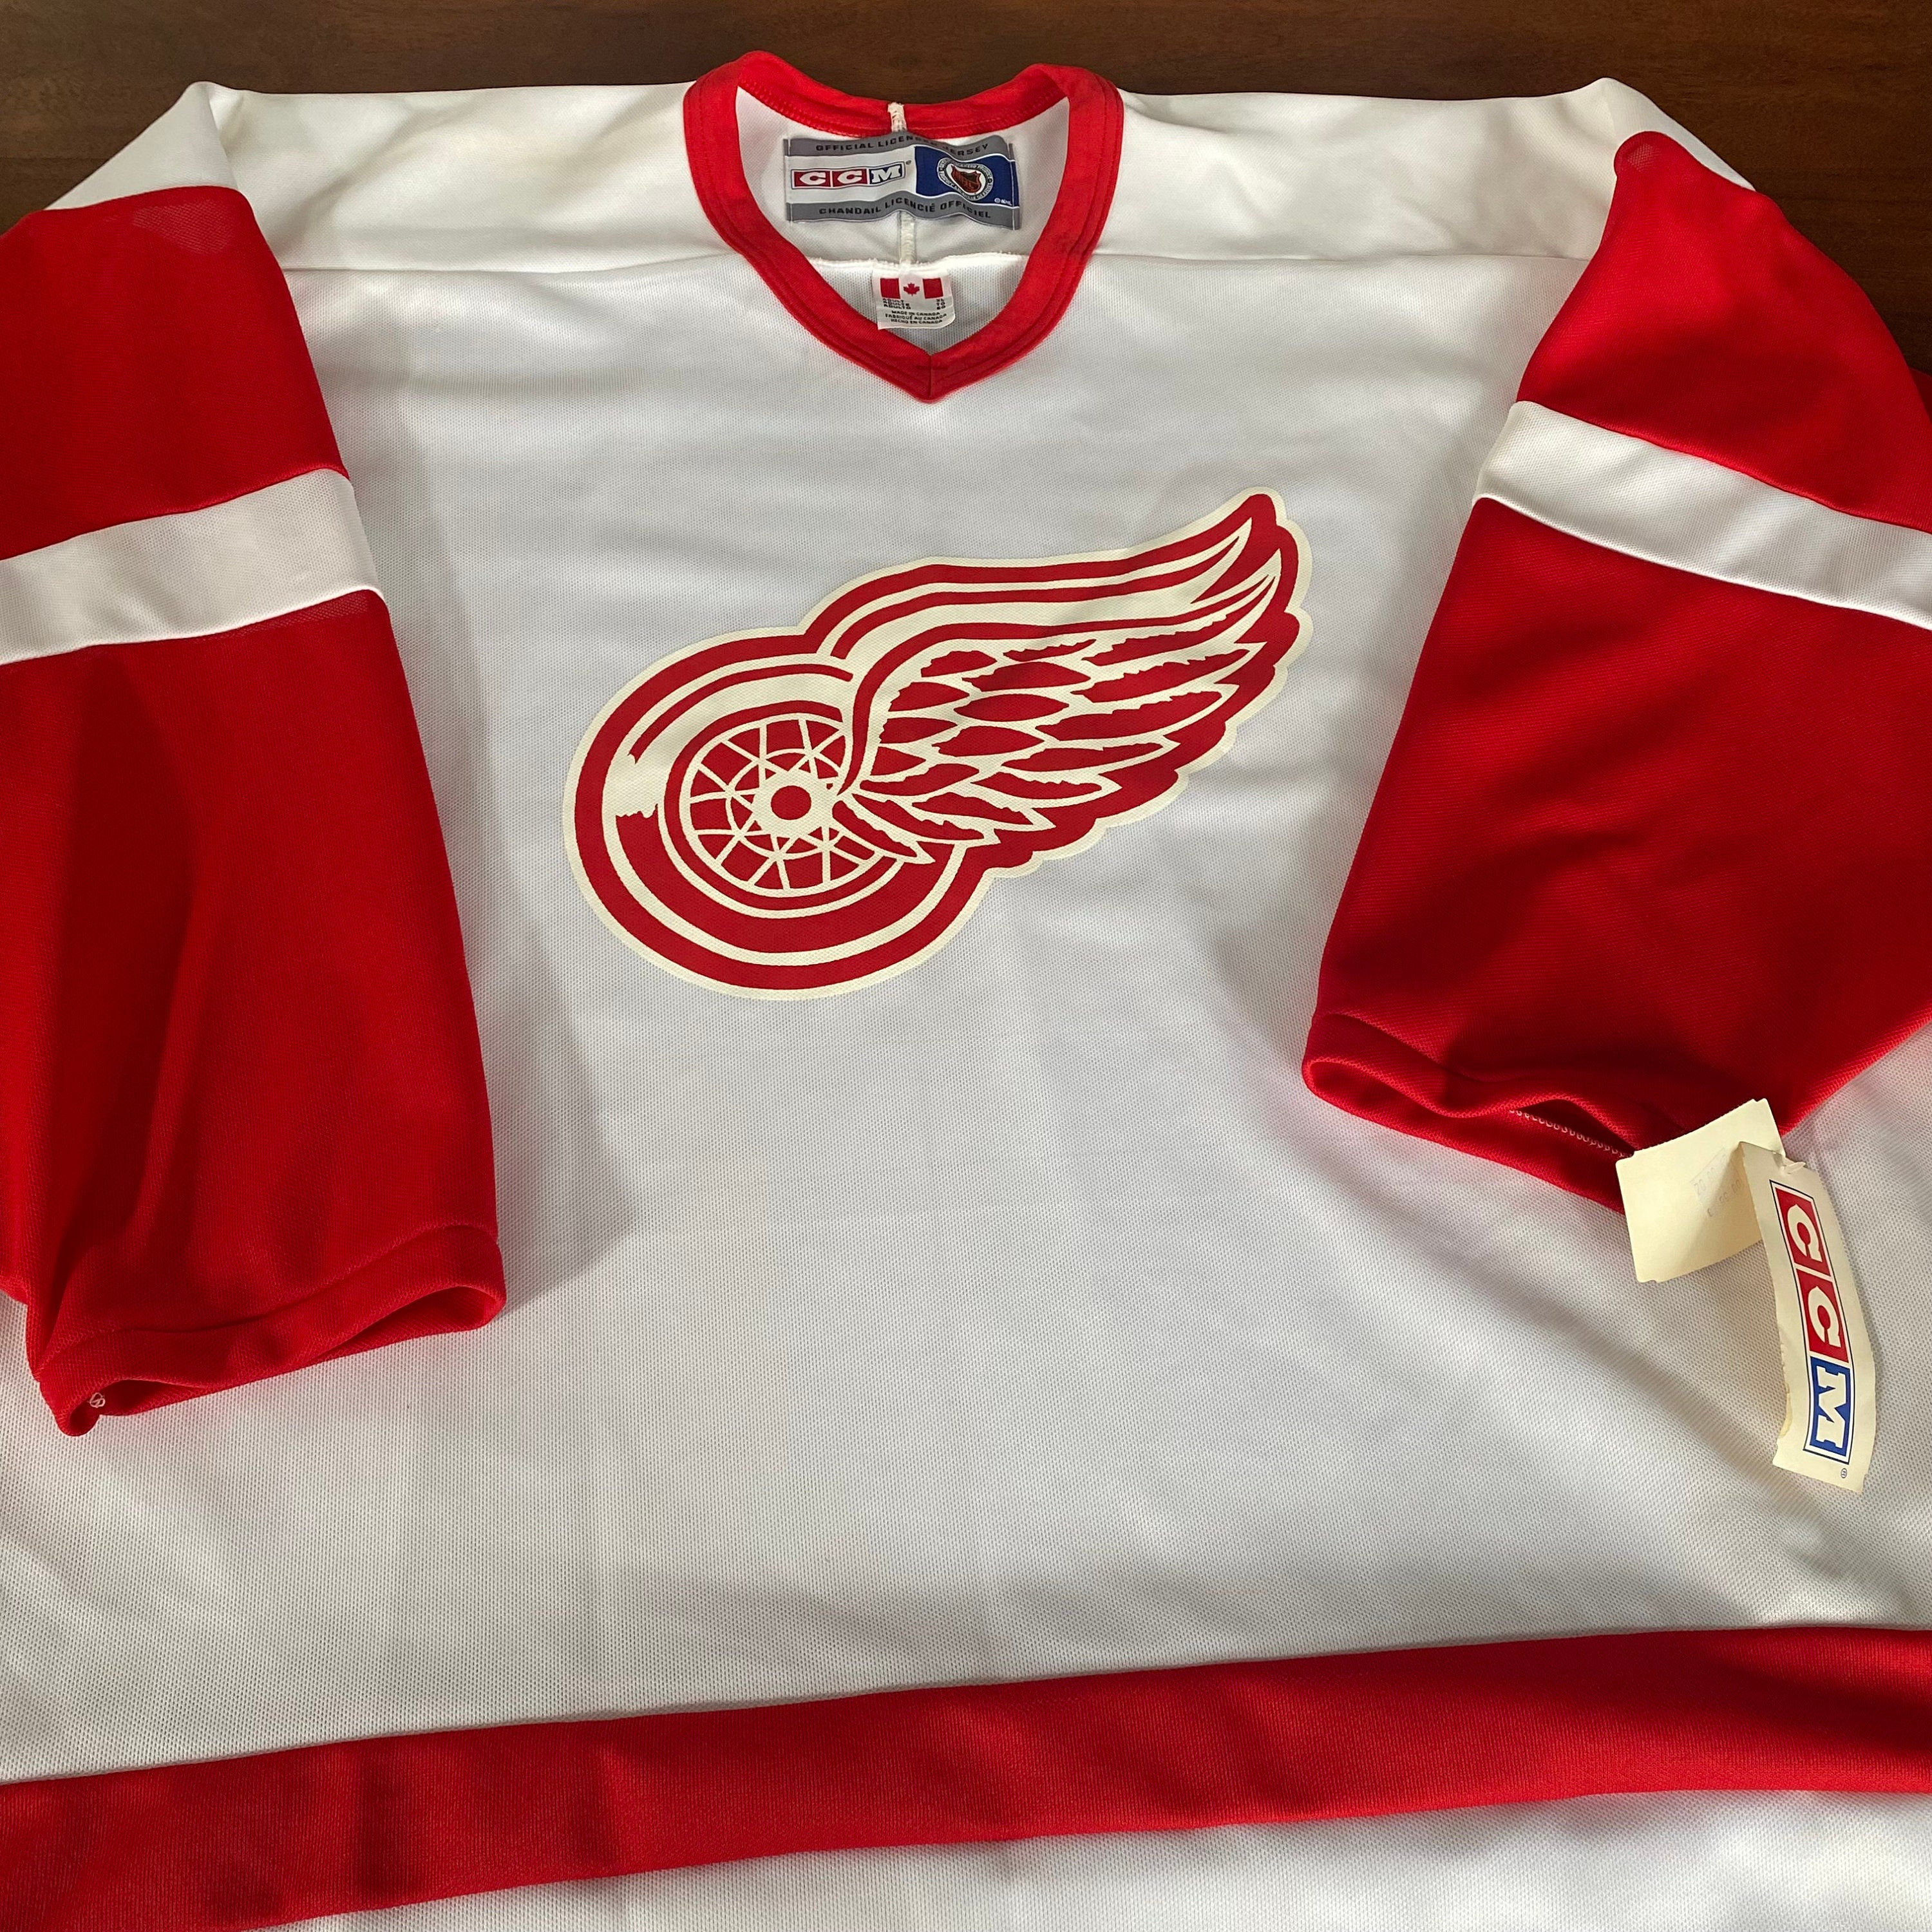 Vintage Detroit Red Wings Sergei Fedorov CCM Hockey Jersey Size Small